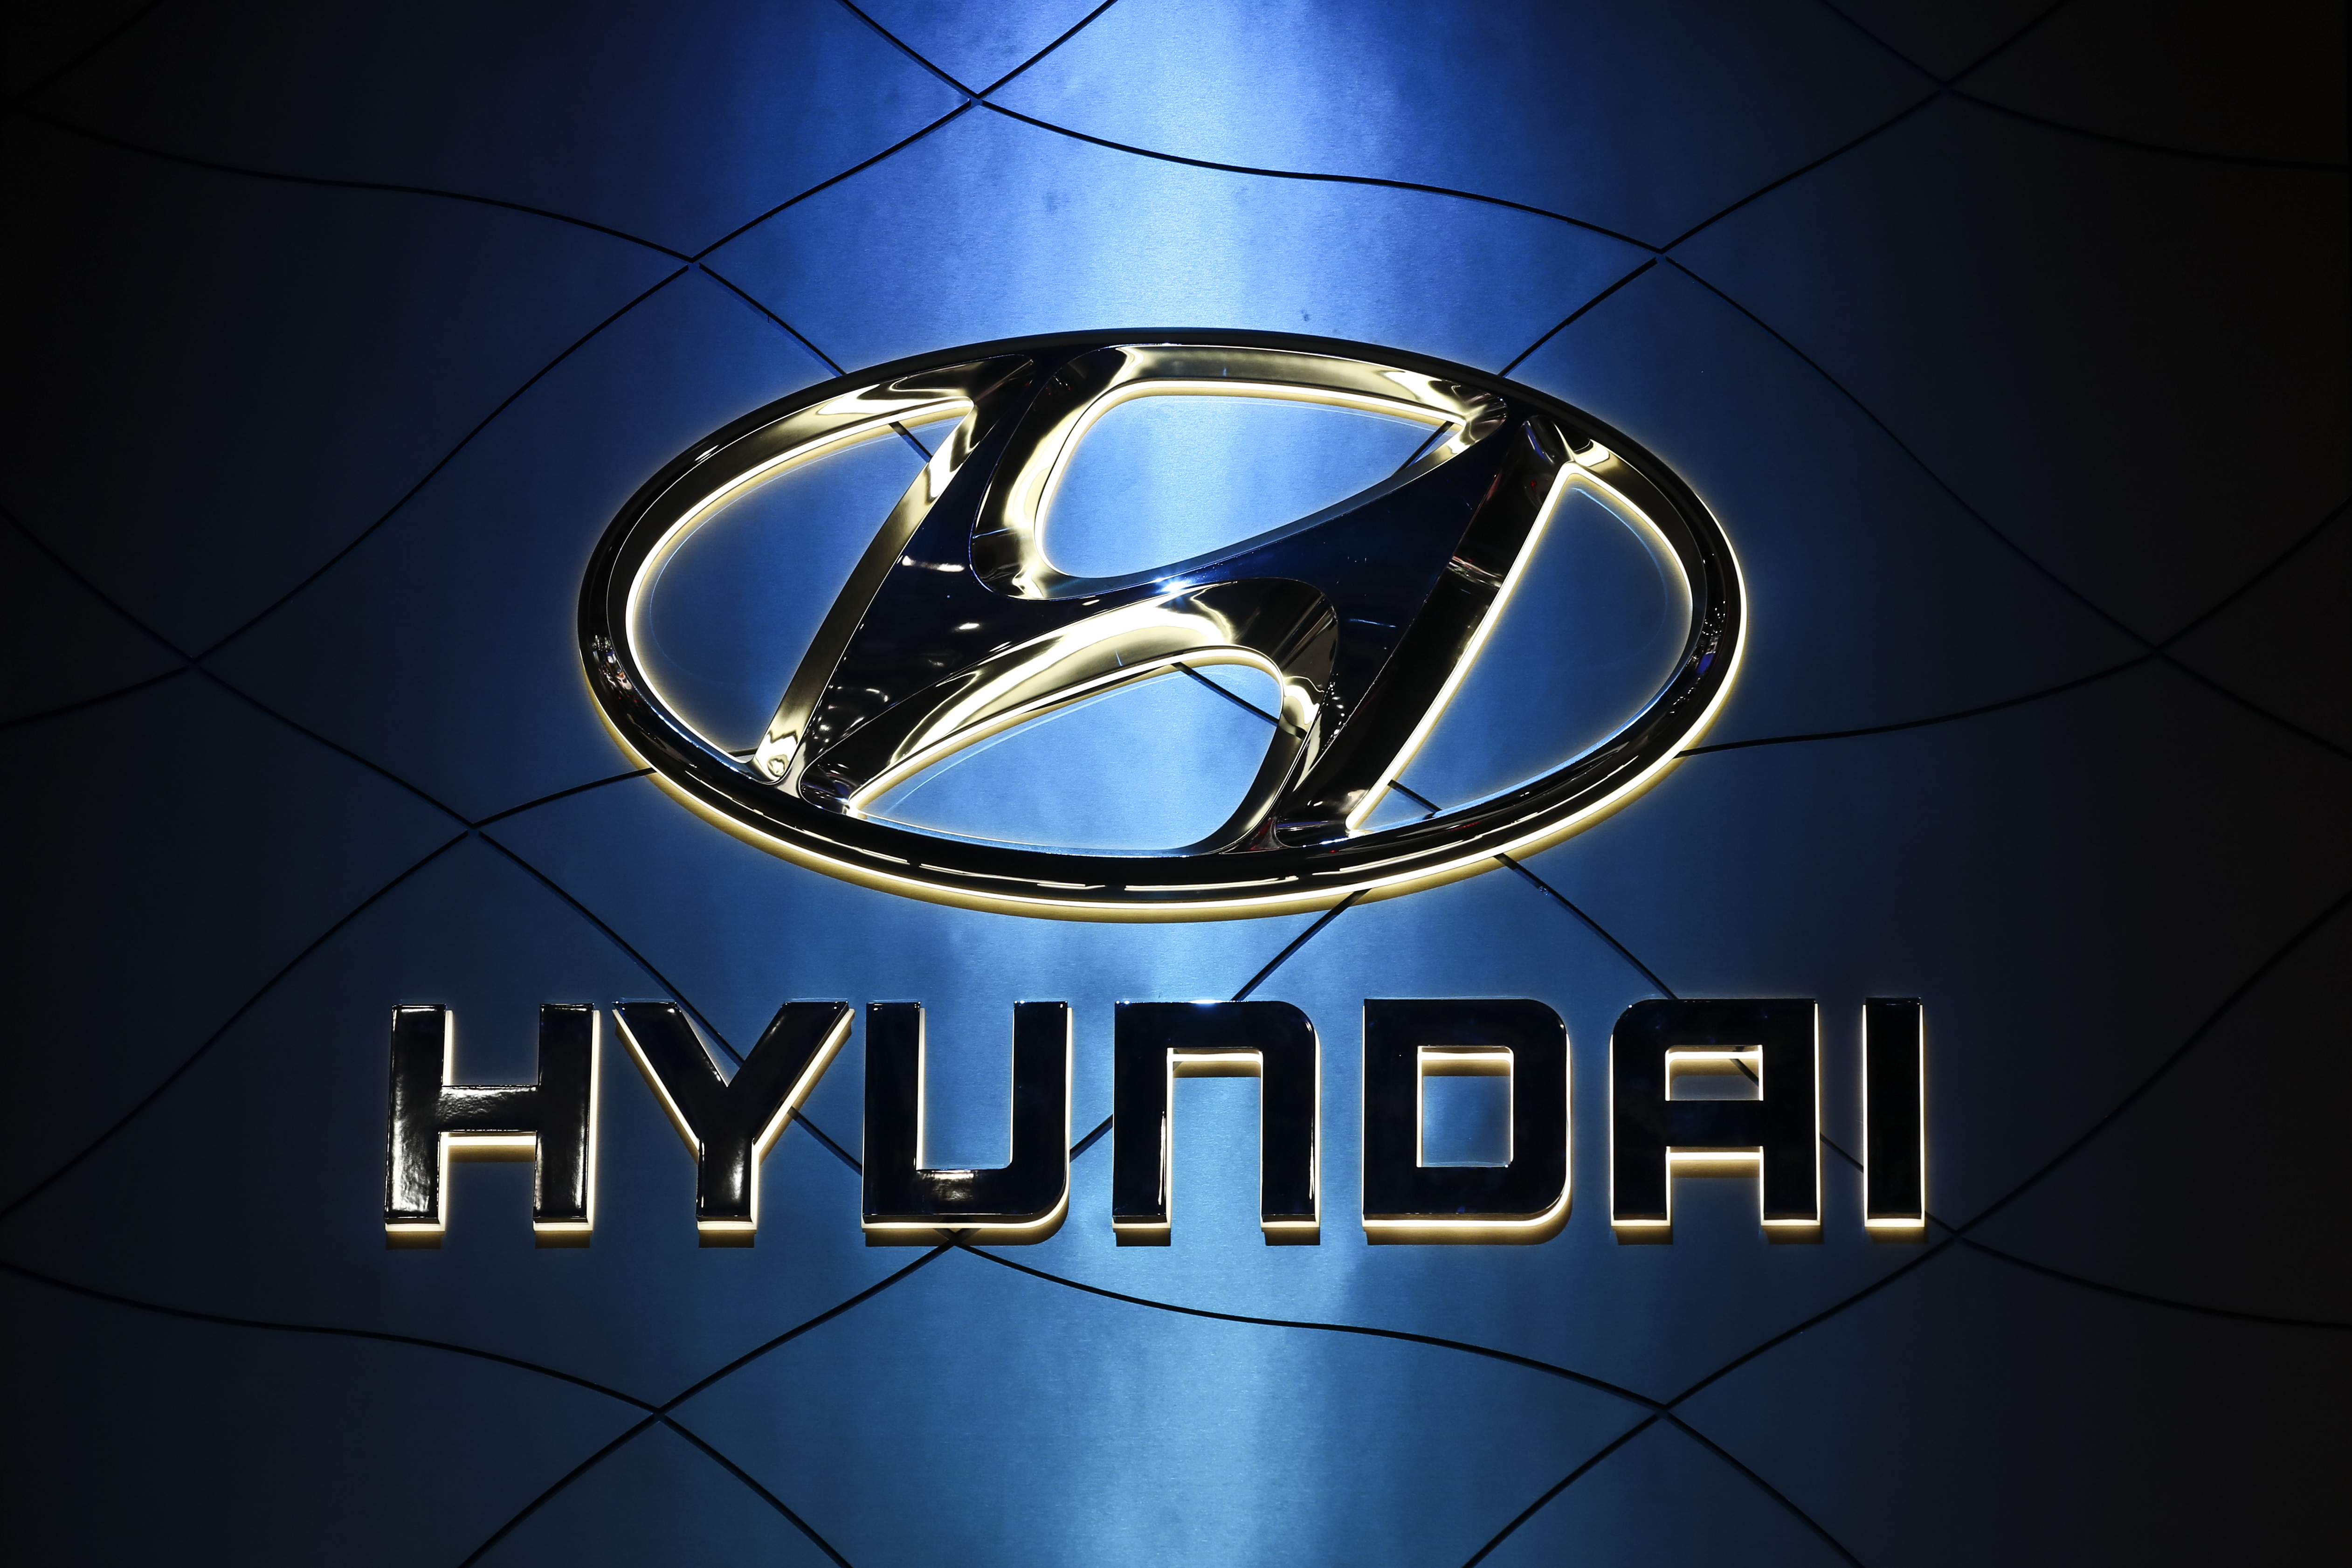 The Hyundai logo is displayed at the New York International Auto Show on March 28, 2018, at the Jacob K. Javits Convention Center in New York City. (Drew Angerer / Getty Images)